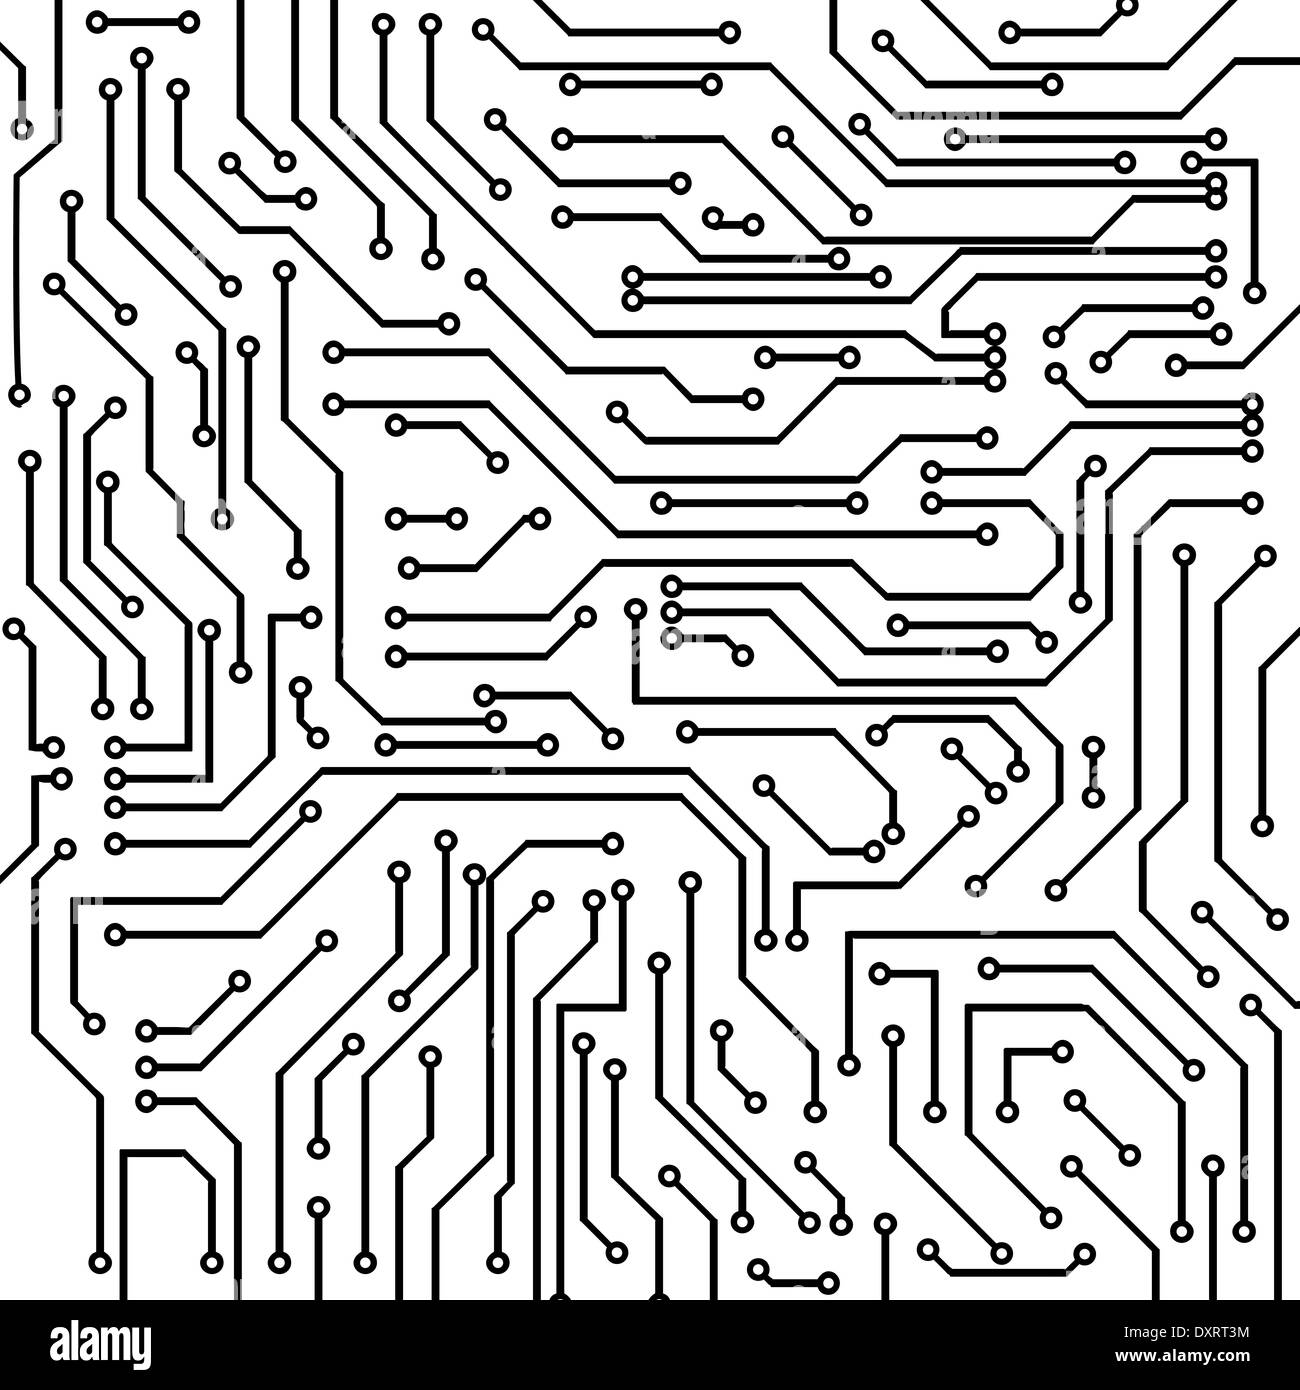 Circuit board background vector Banque D'Images